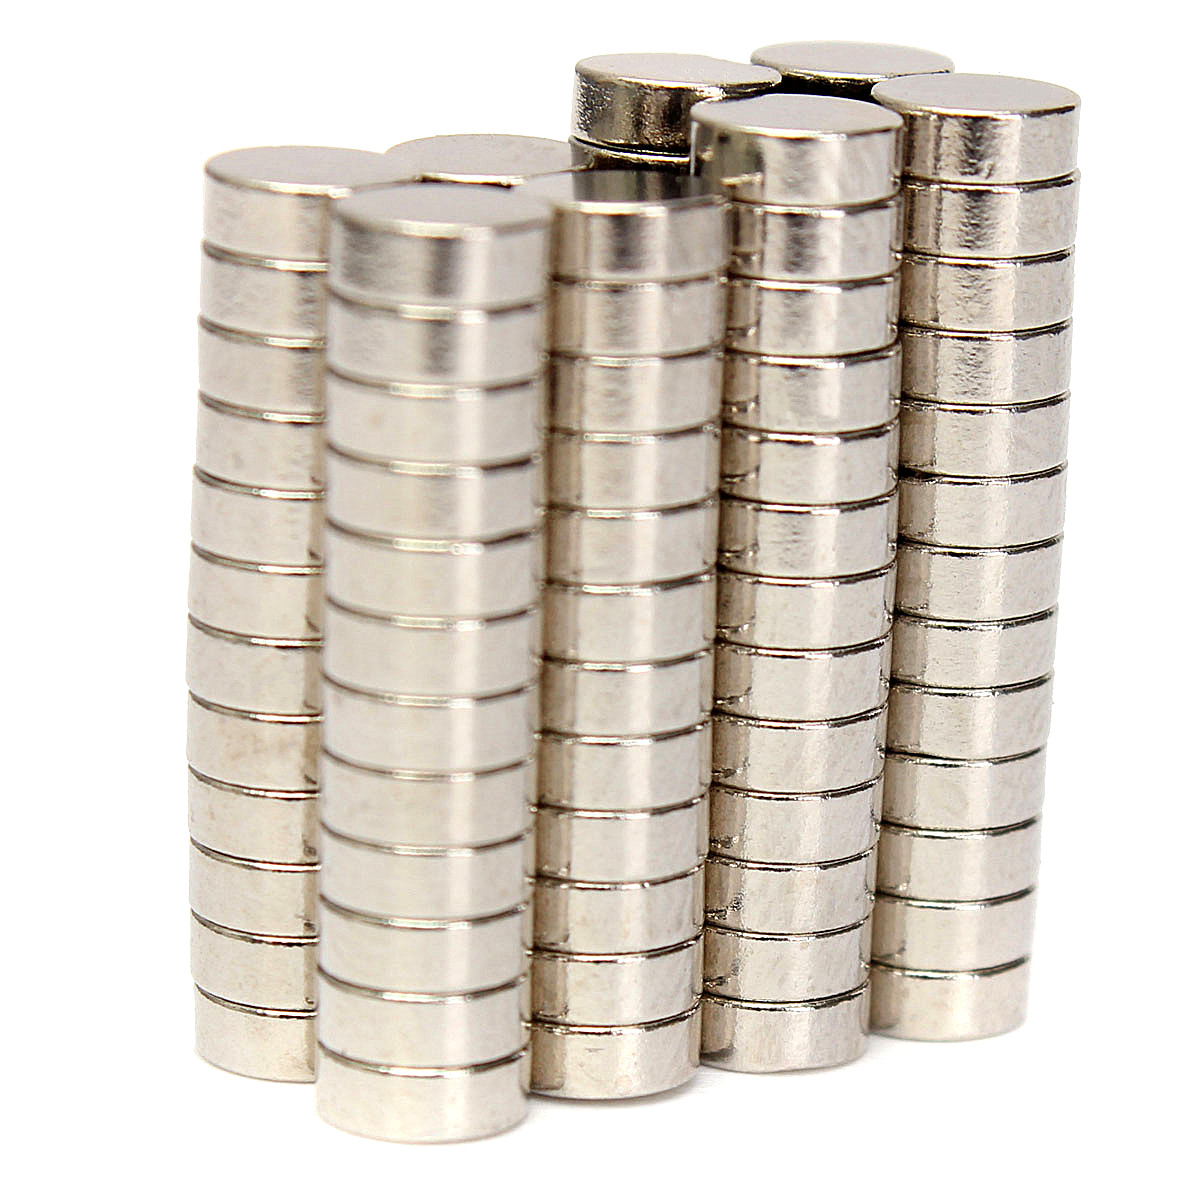 100pcs-5mmx2mm-N52-Strong-Round-Magnets-Rare-Earth-NdFeB-Neodymium-Magnet-988439